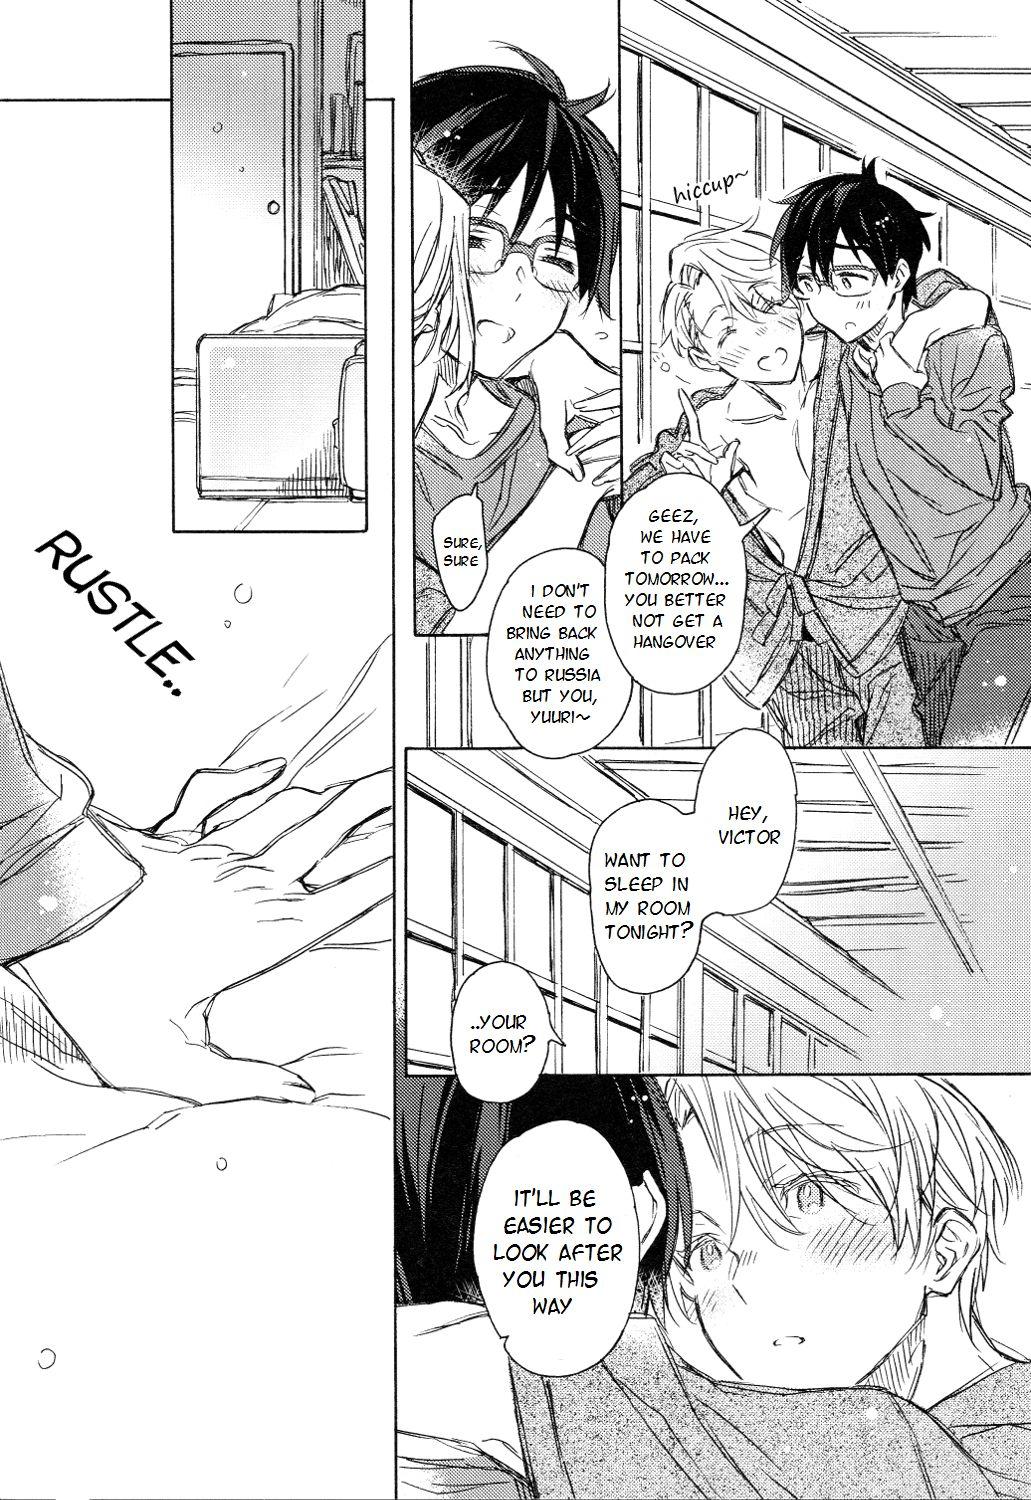 Pervs BRAND NEW DAY,BRAND NEW LIFE - Yuri on ice Teenage - Page 7